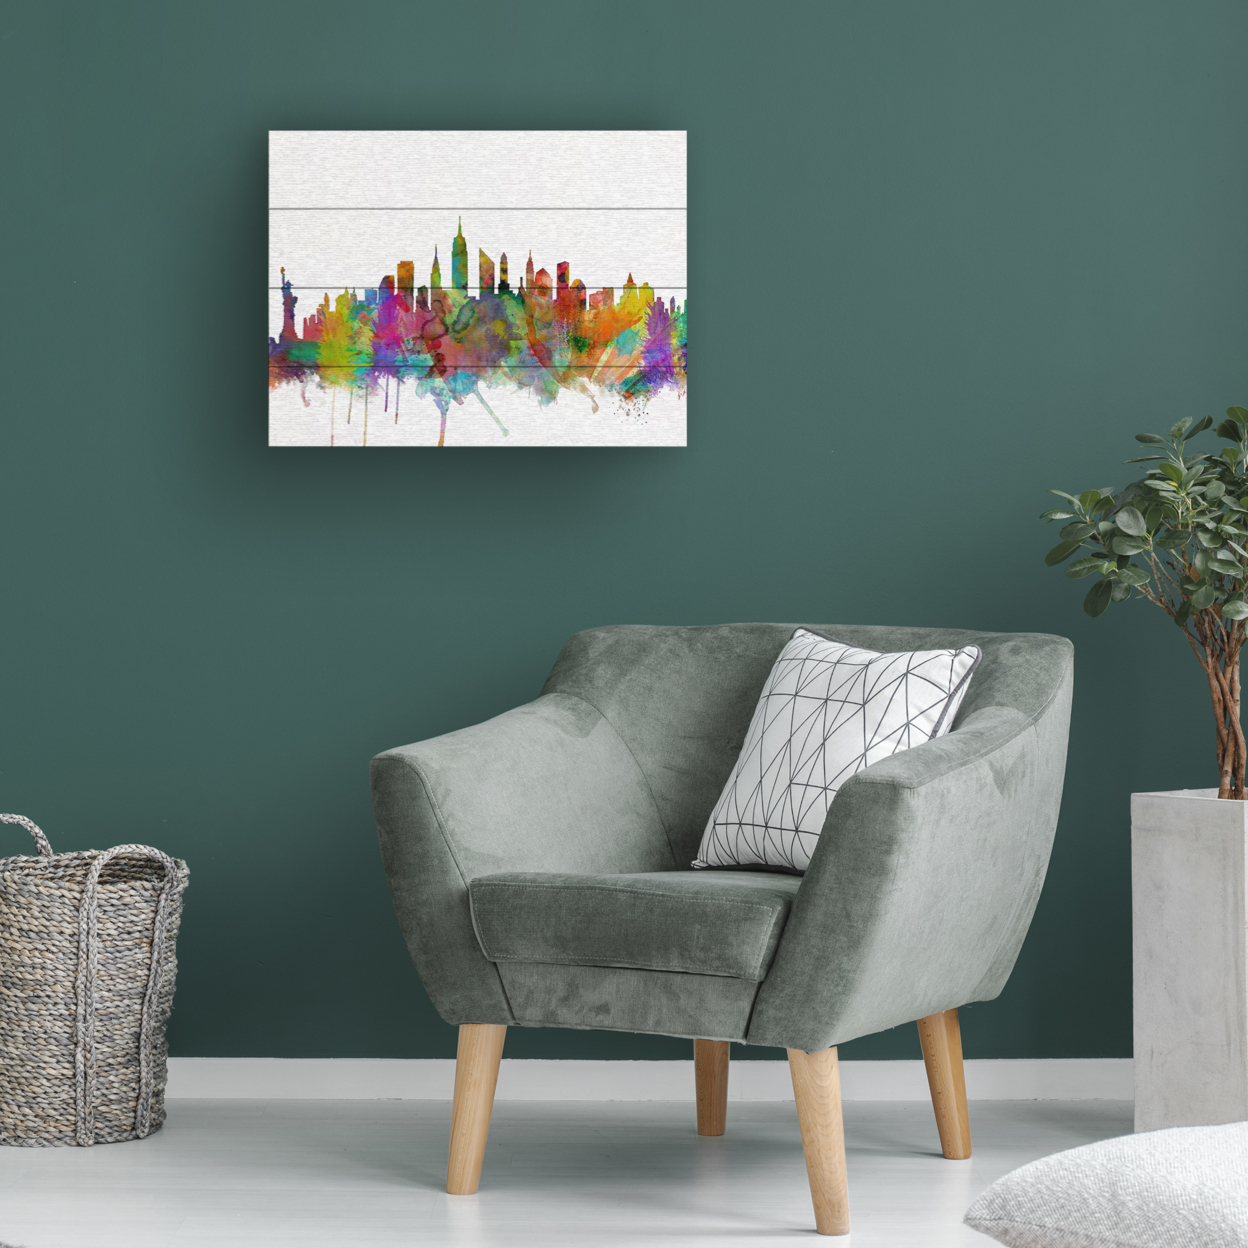 Wall Art 12 X 16 Inches Titled New York City Skyline Ready To Hang Printed On Wooden Planks